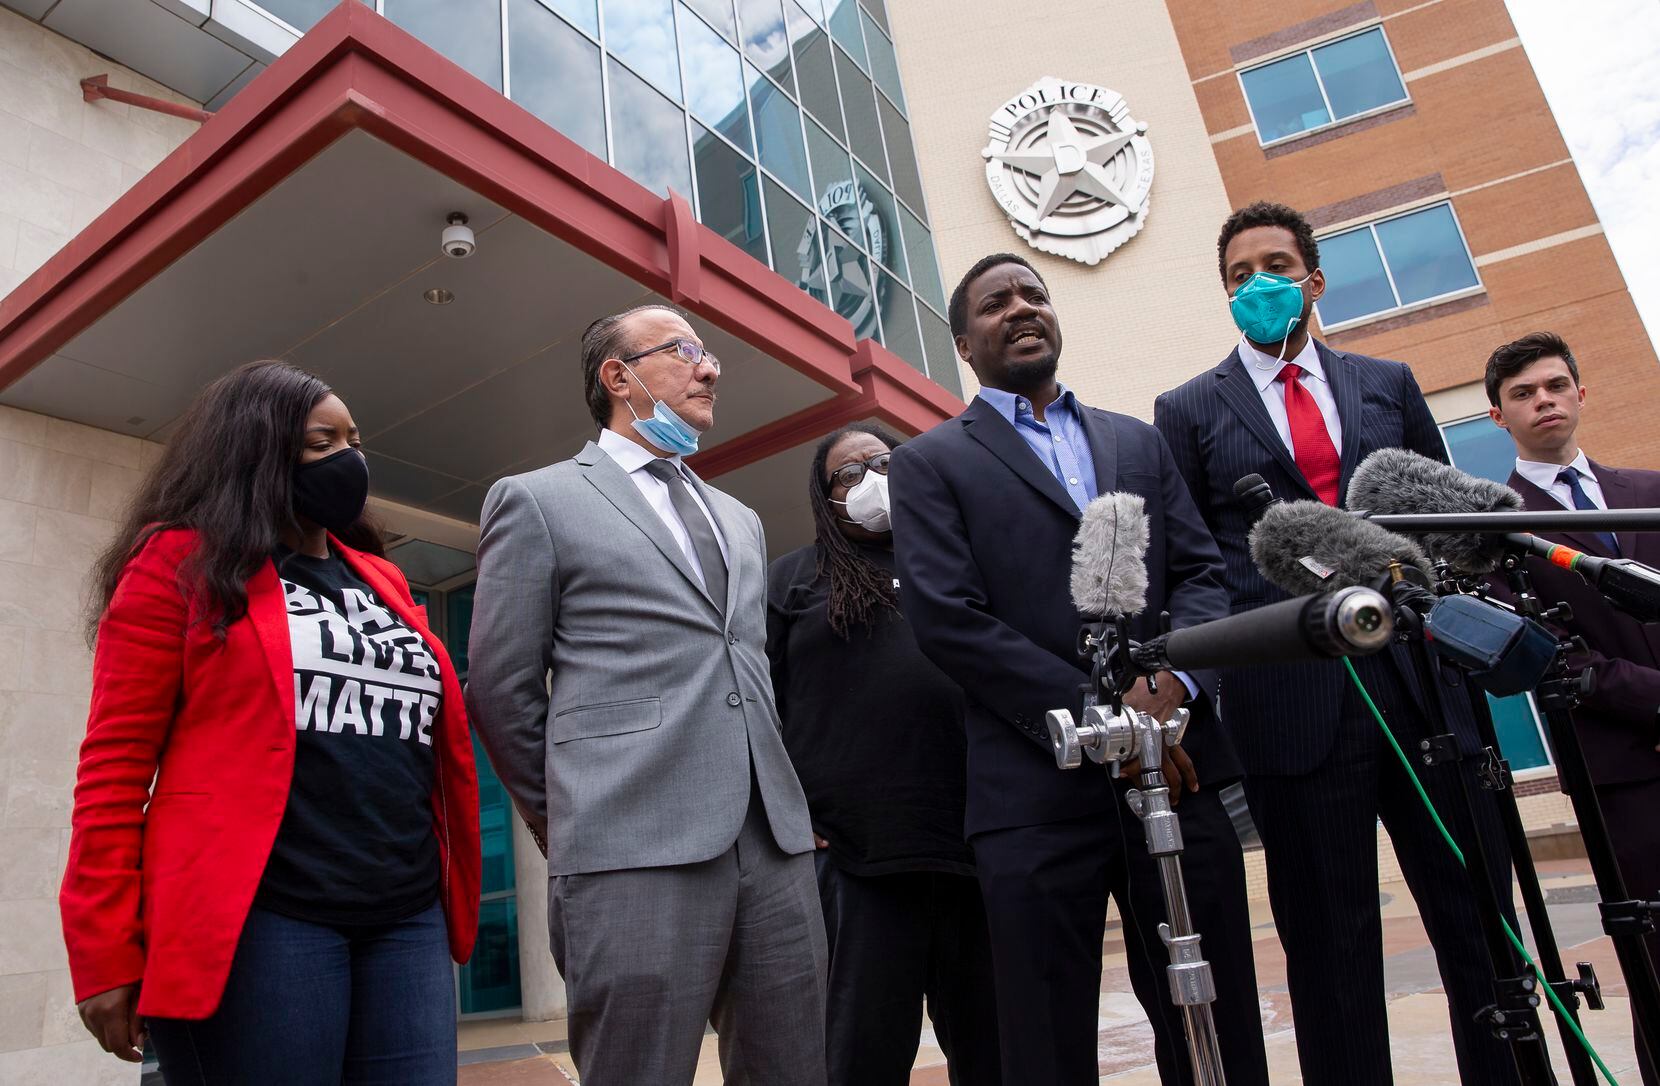 Dominique Alexander, president of Next Generation Action Network, and other community activists and attorneys called for reform after a disappointing meeting with city officials at Dallas police headquarters on June 1, 2020.